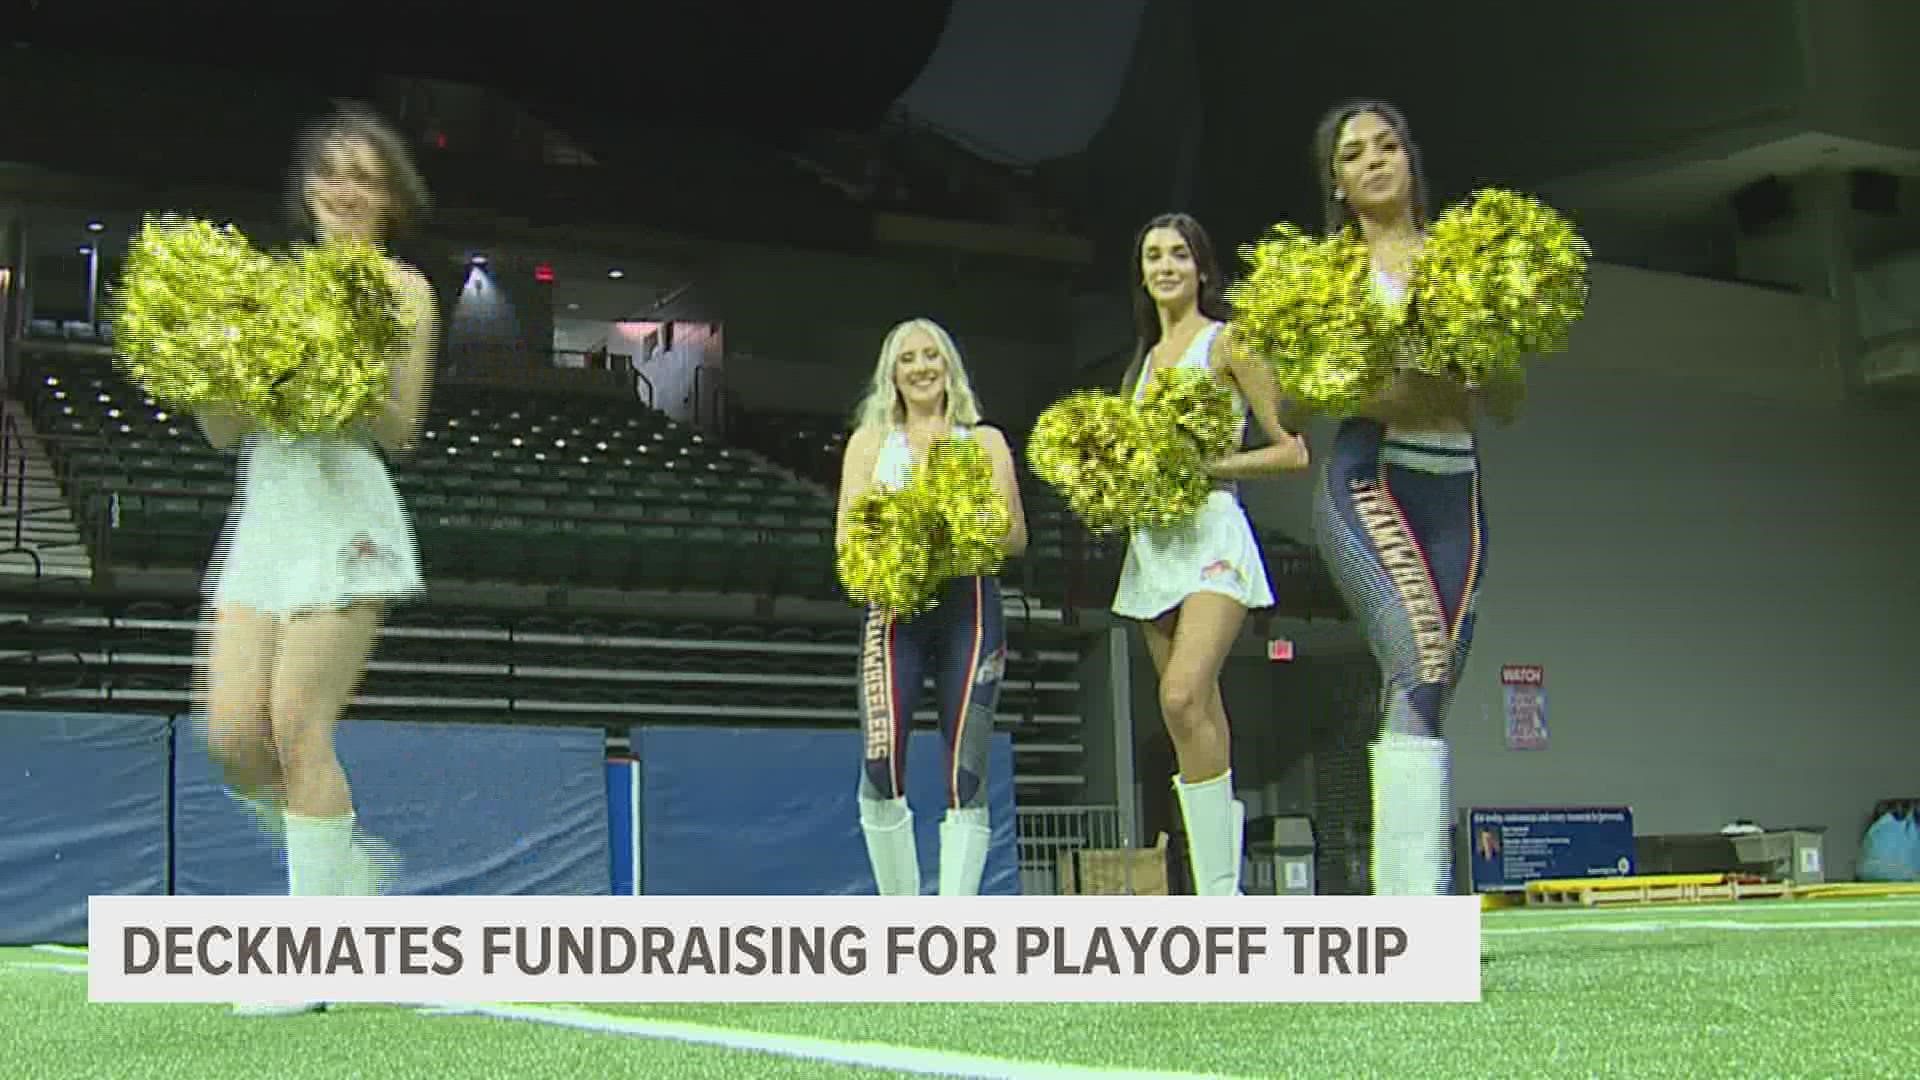 The Steamwheelers are heading to the championships, but their cheerleaders won't be joining them unless they raise $10,000 in the next week.